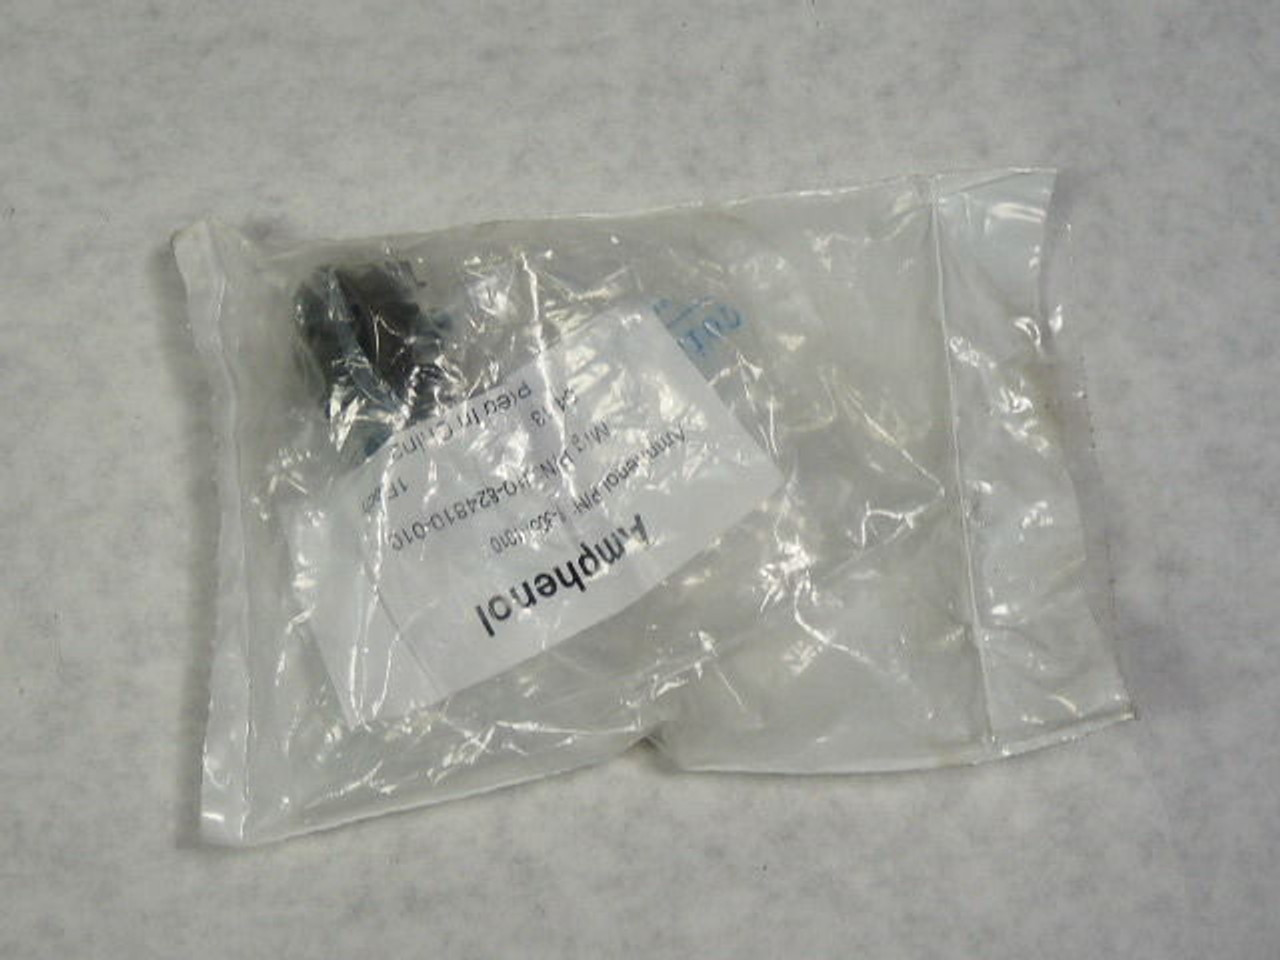 Amphenol 97-3057-1010 MS3057A Termination Cable Clamp Sz18 ! NEW !